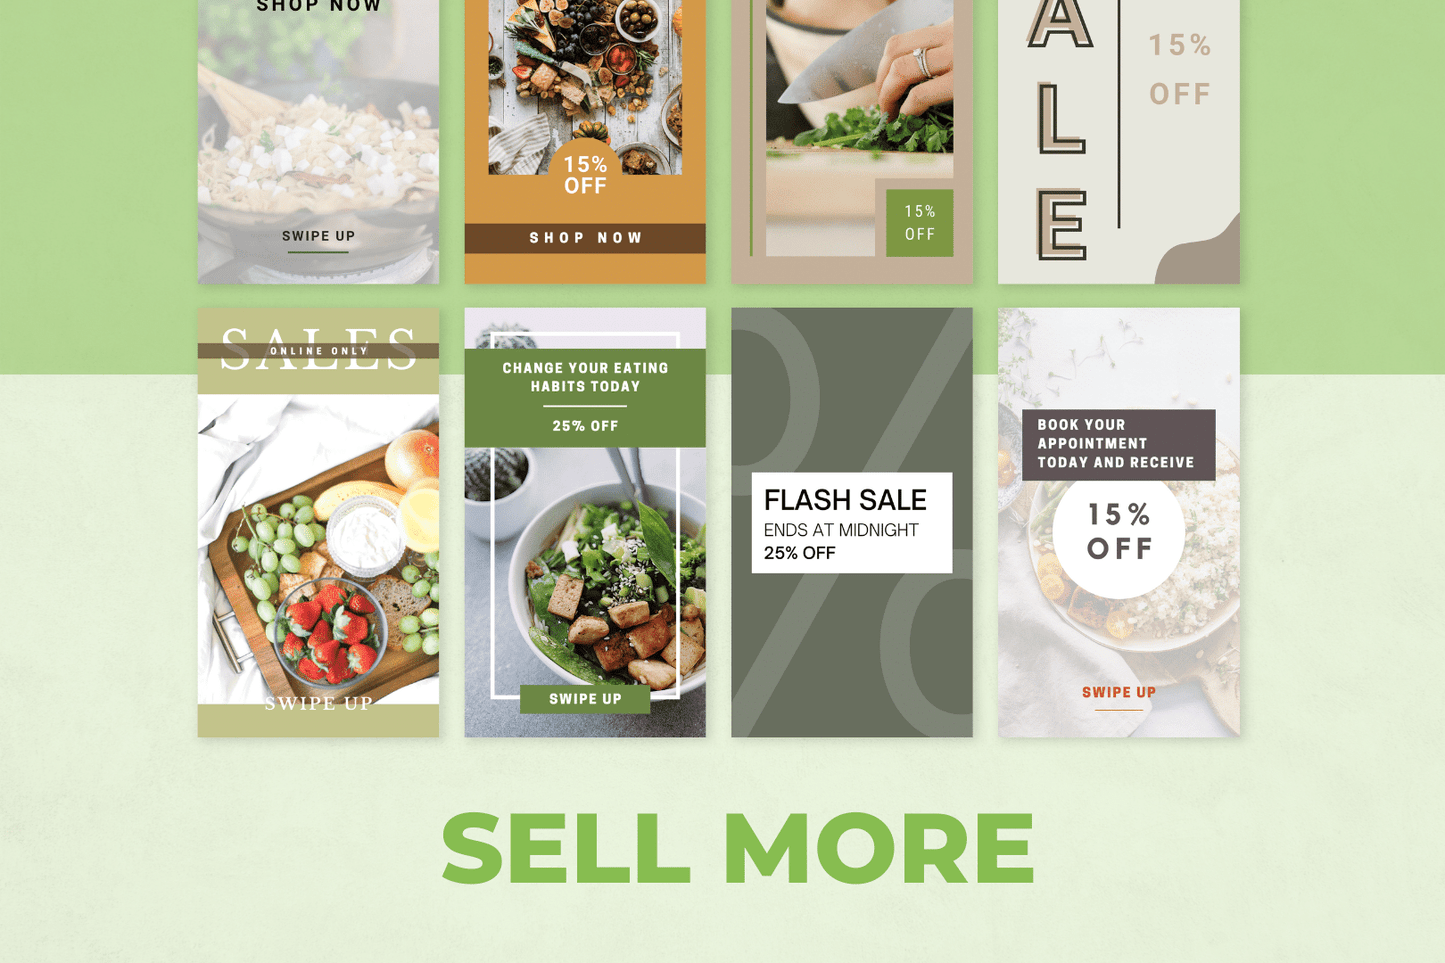 50 Sales + Promotion Nutrition Templates for Stories